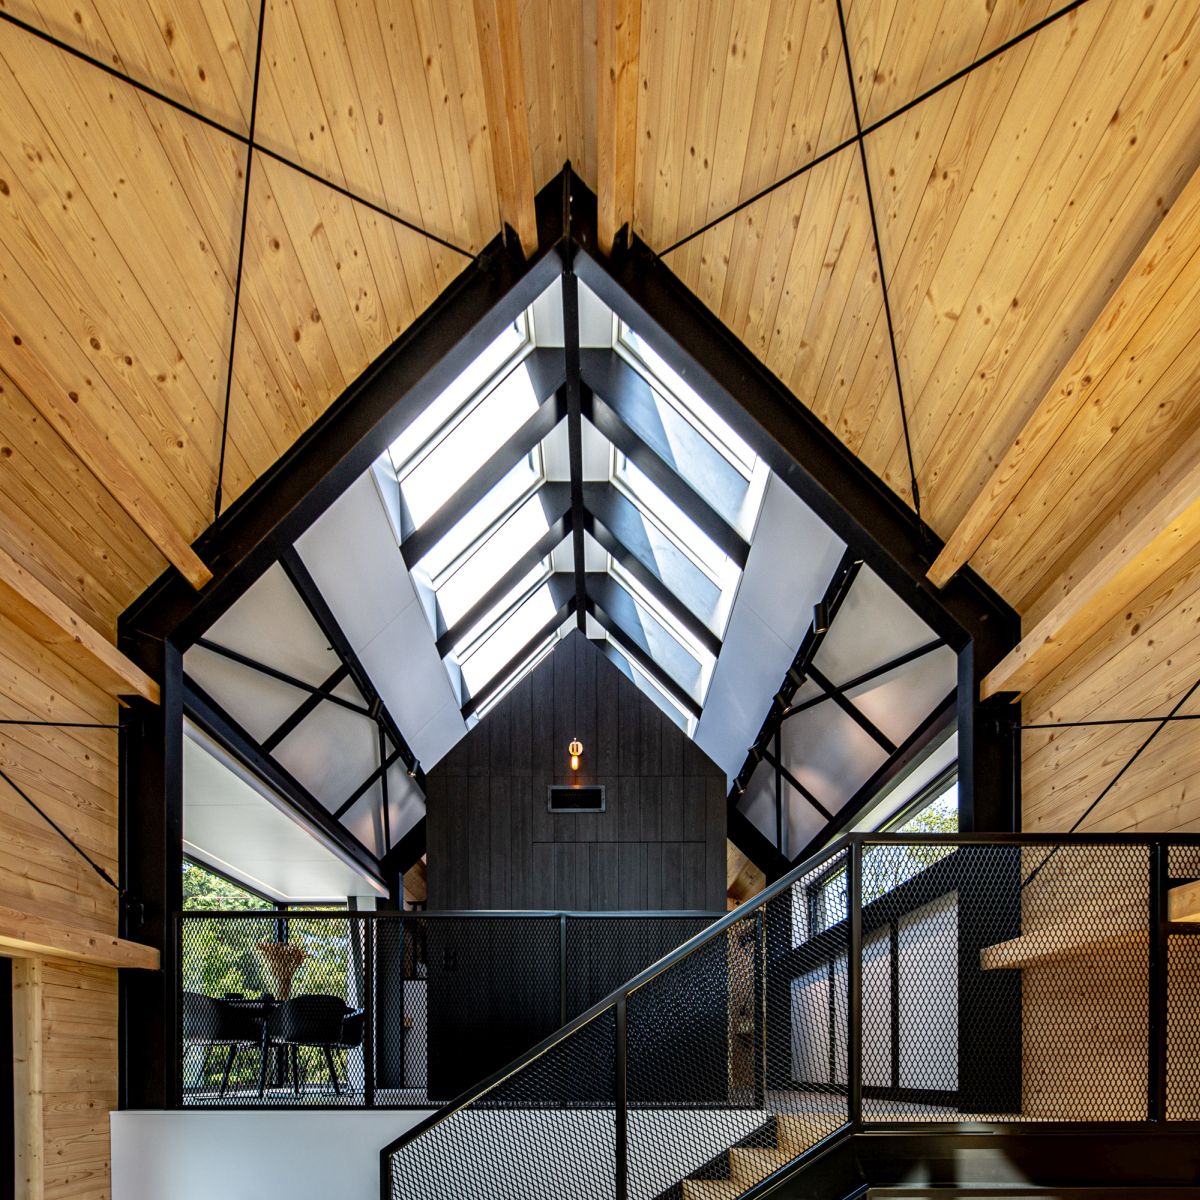 A series of skylights bring natural light into the upstairs volumes